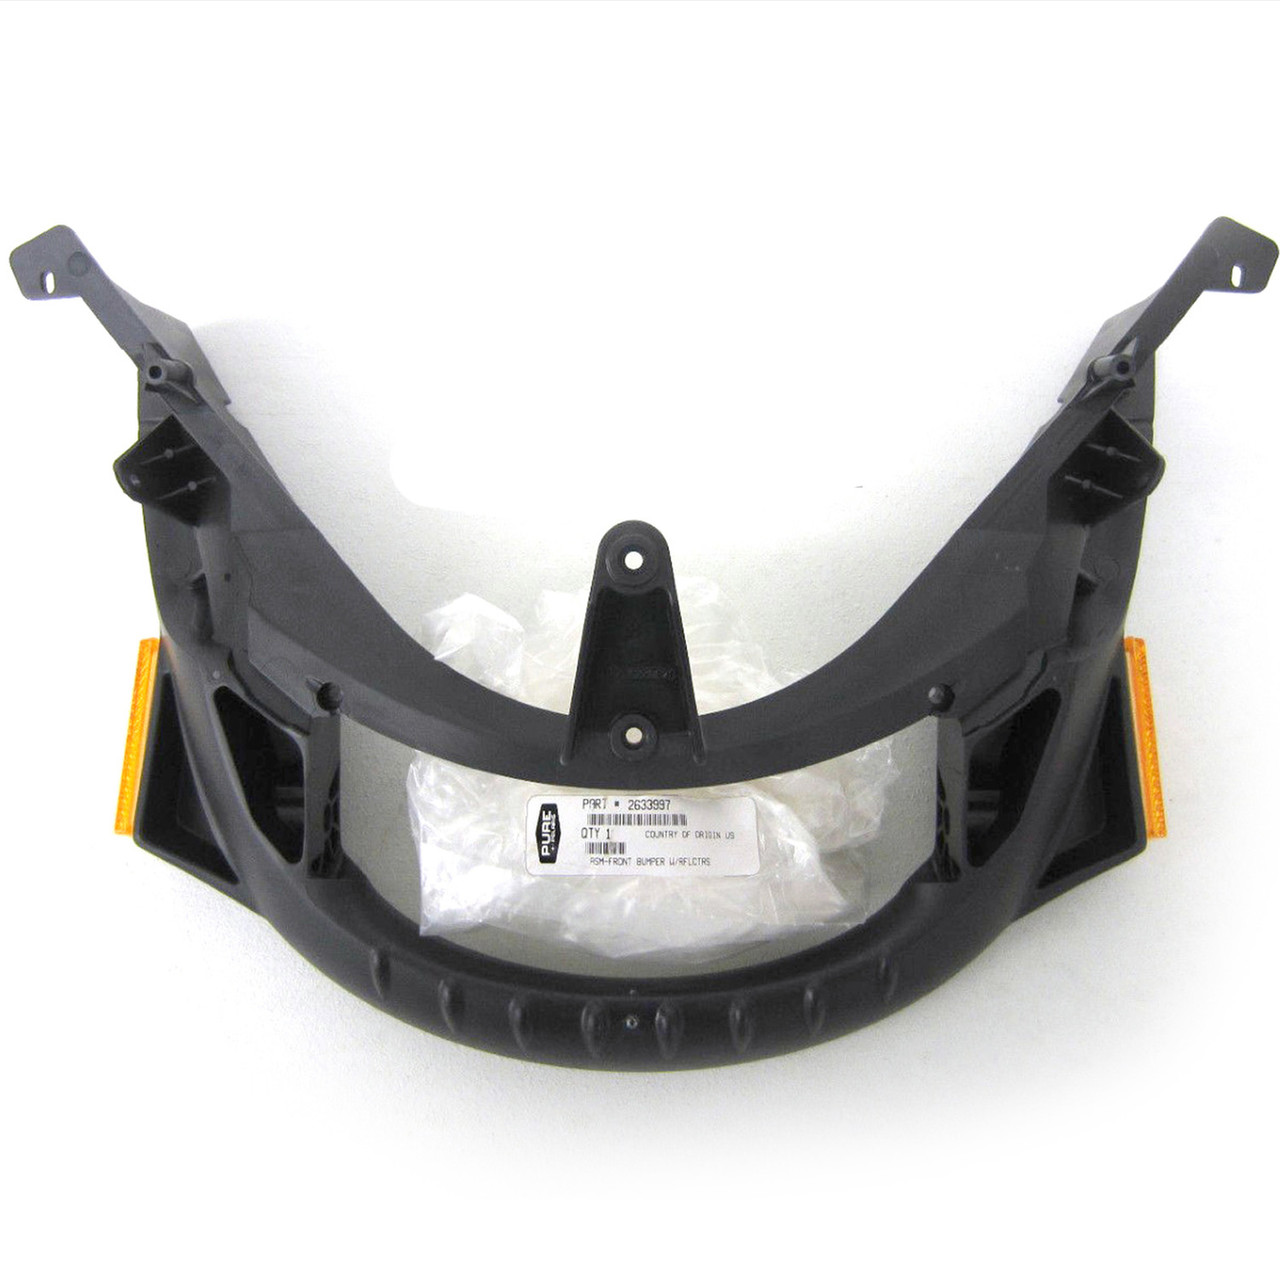 Polaris Snowmobile New OEM Front Bumper with Reflectors Assembly, 2633997